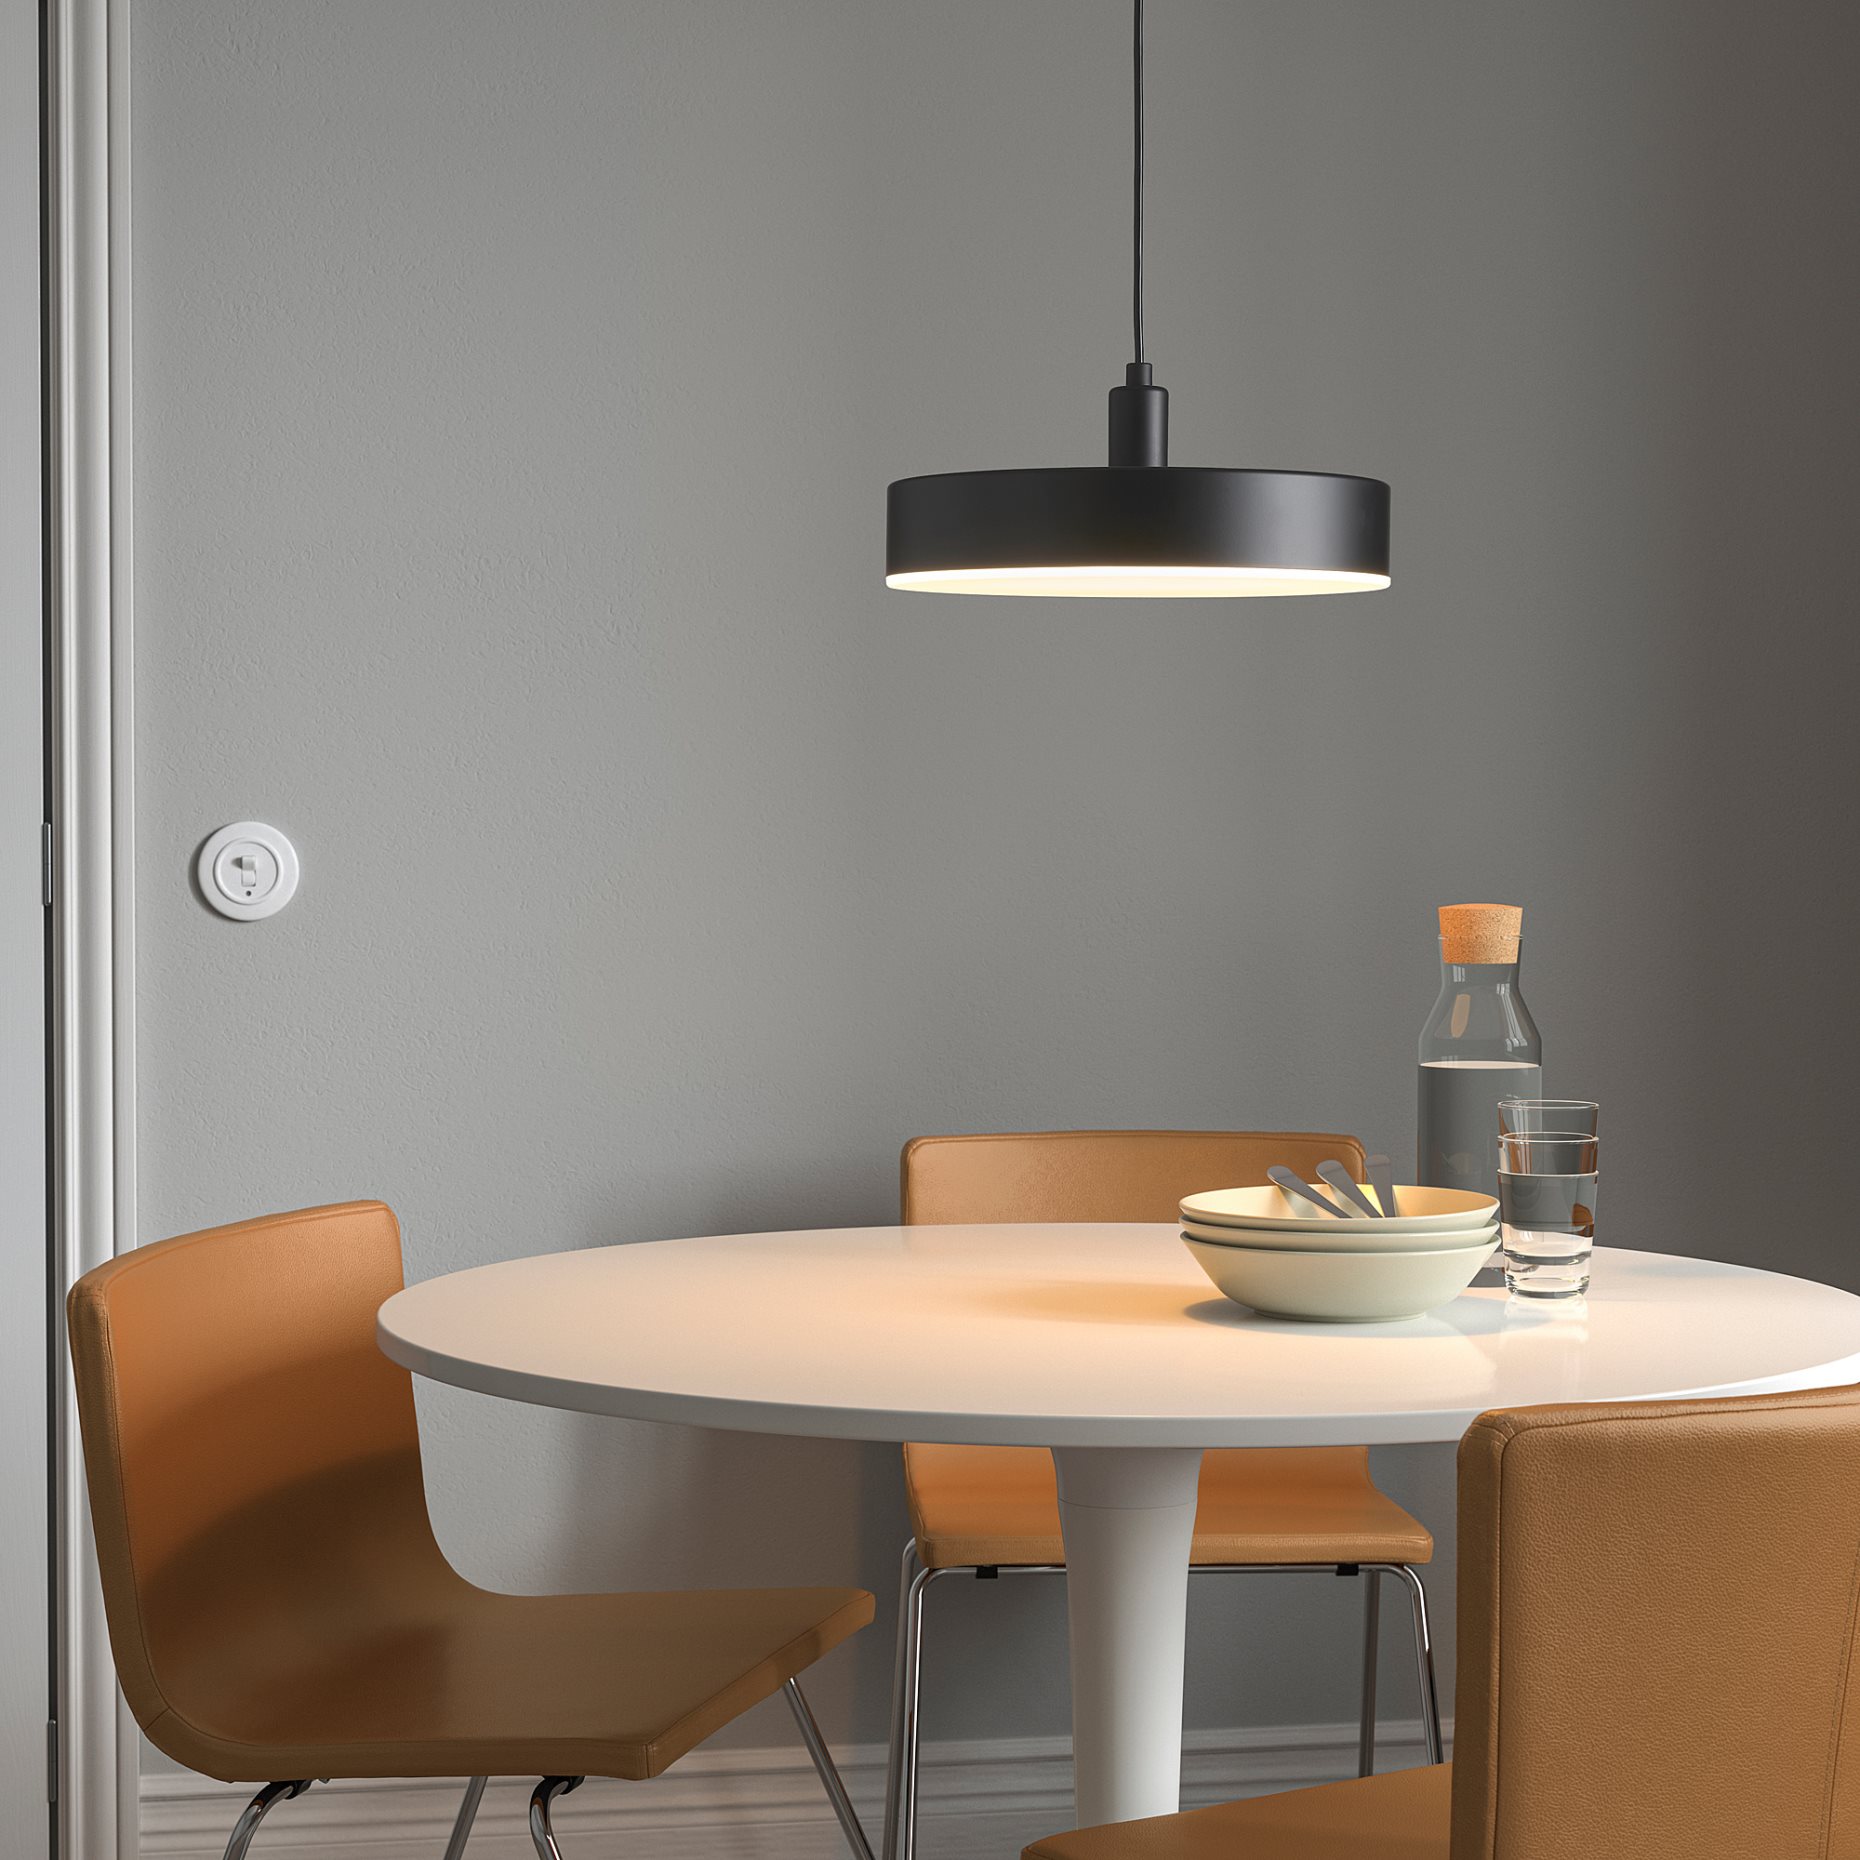 NYMÅNE, pendant lamp with built-in LED light source, 38 cm, 505.040.41